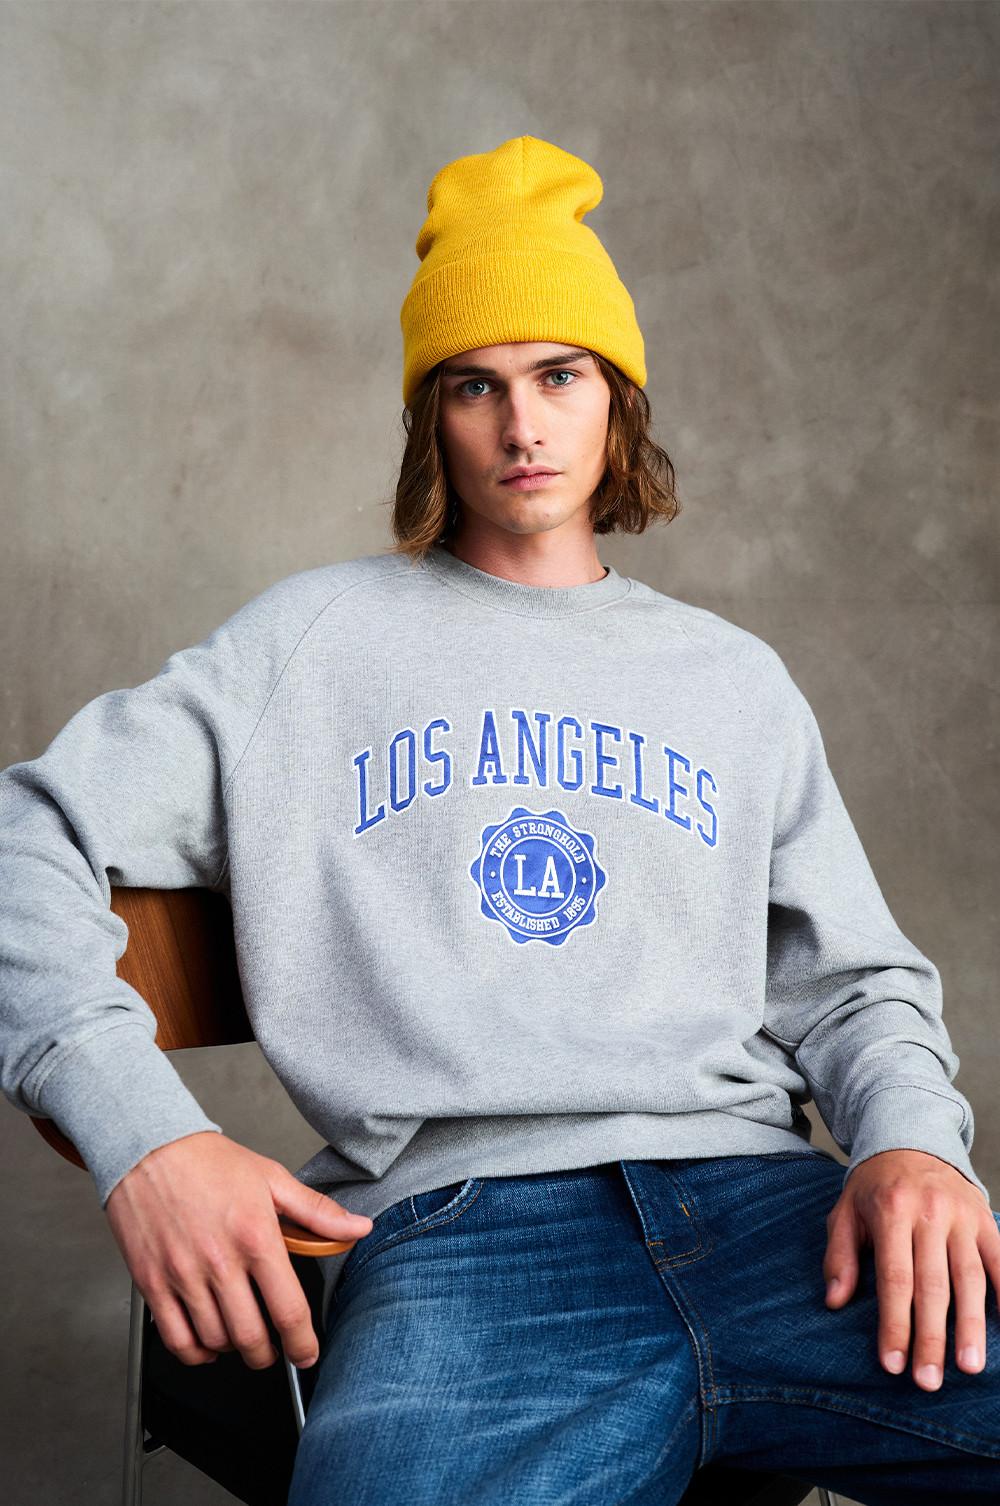 Model in gray Los Angeles sweatshirt, yellow beanie and jeans